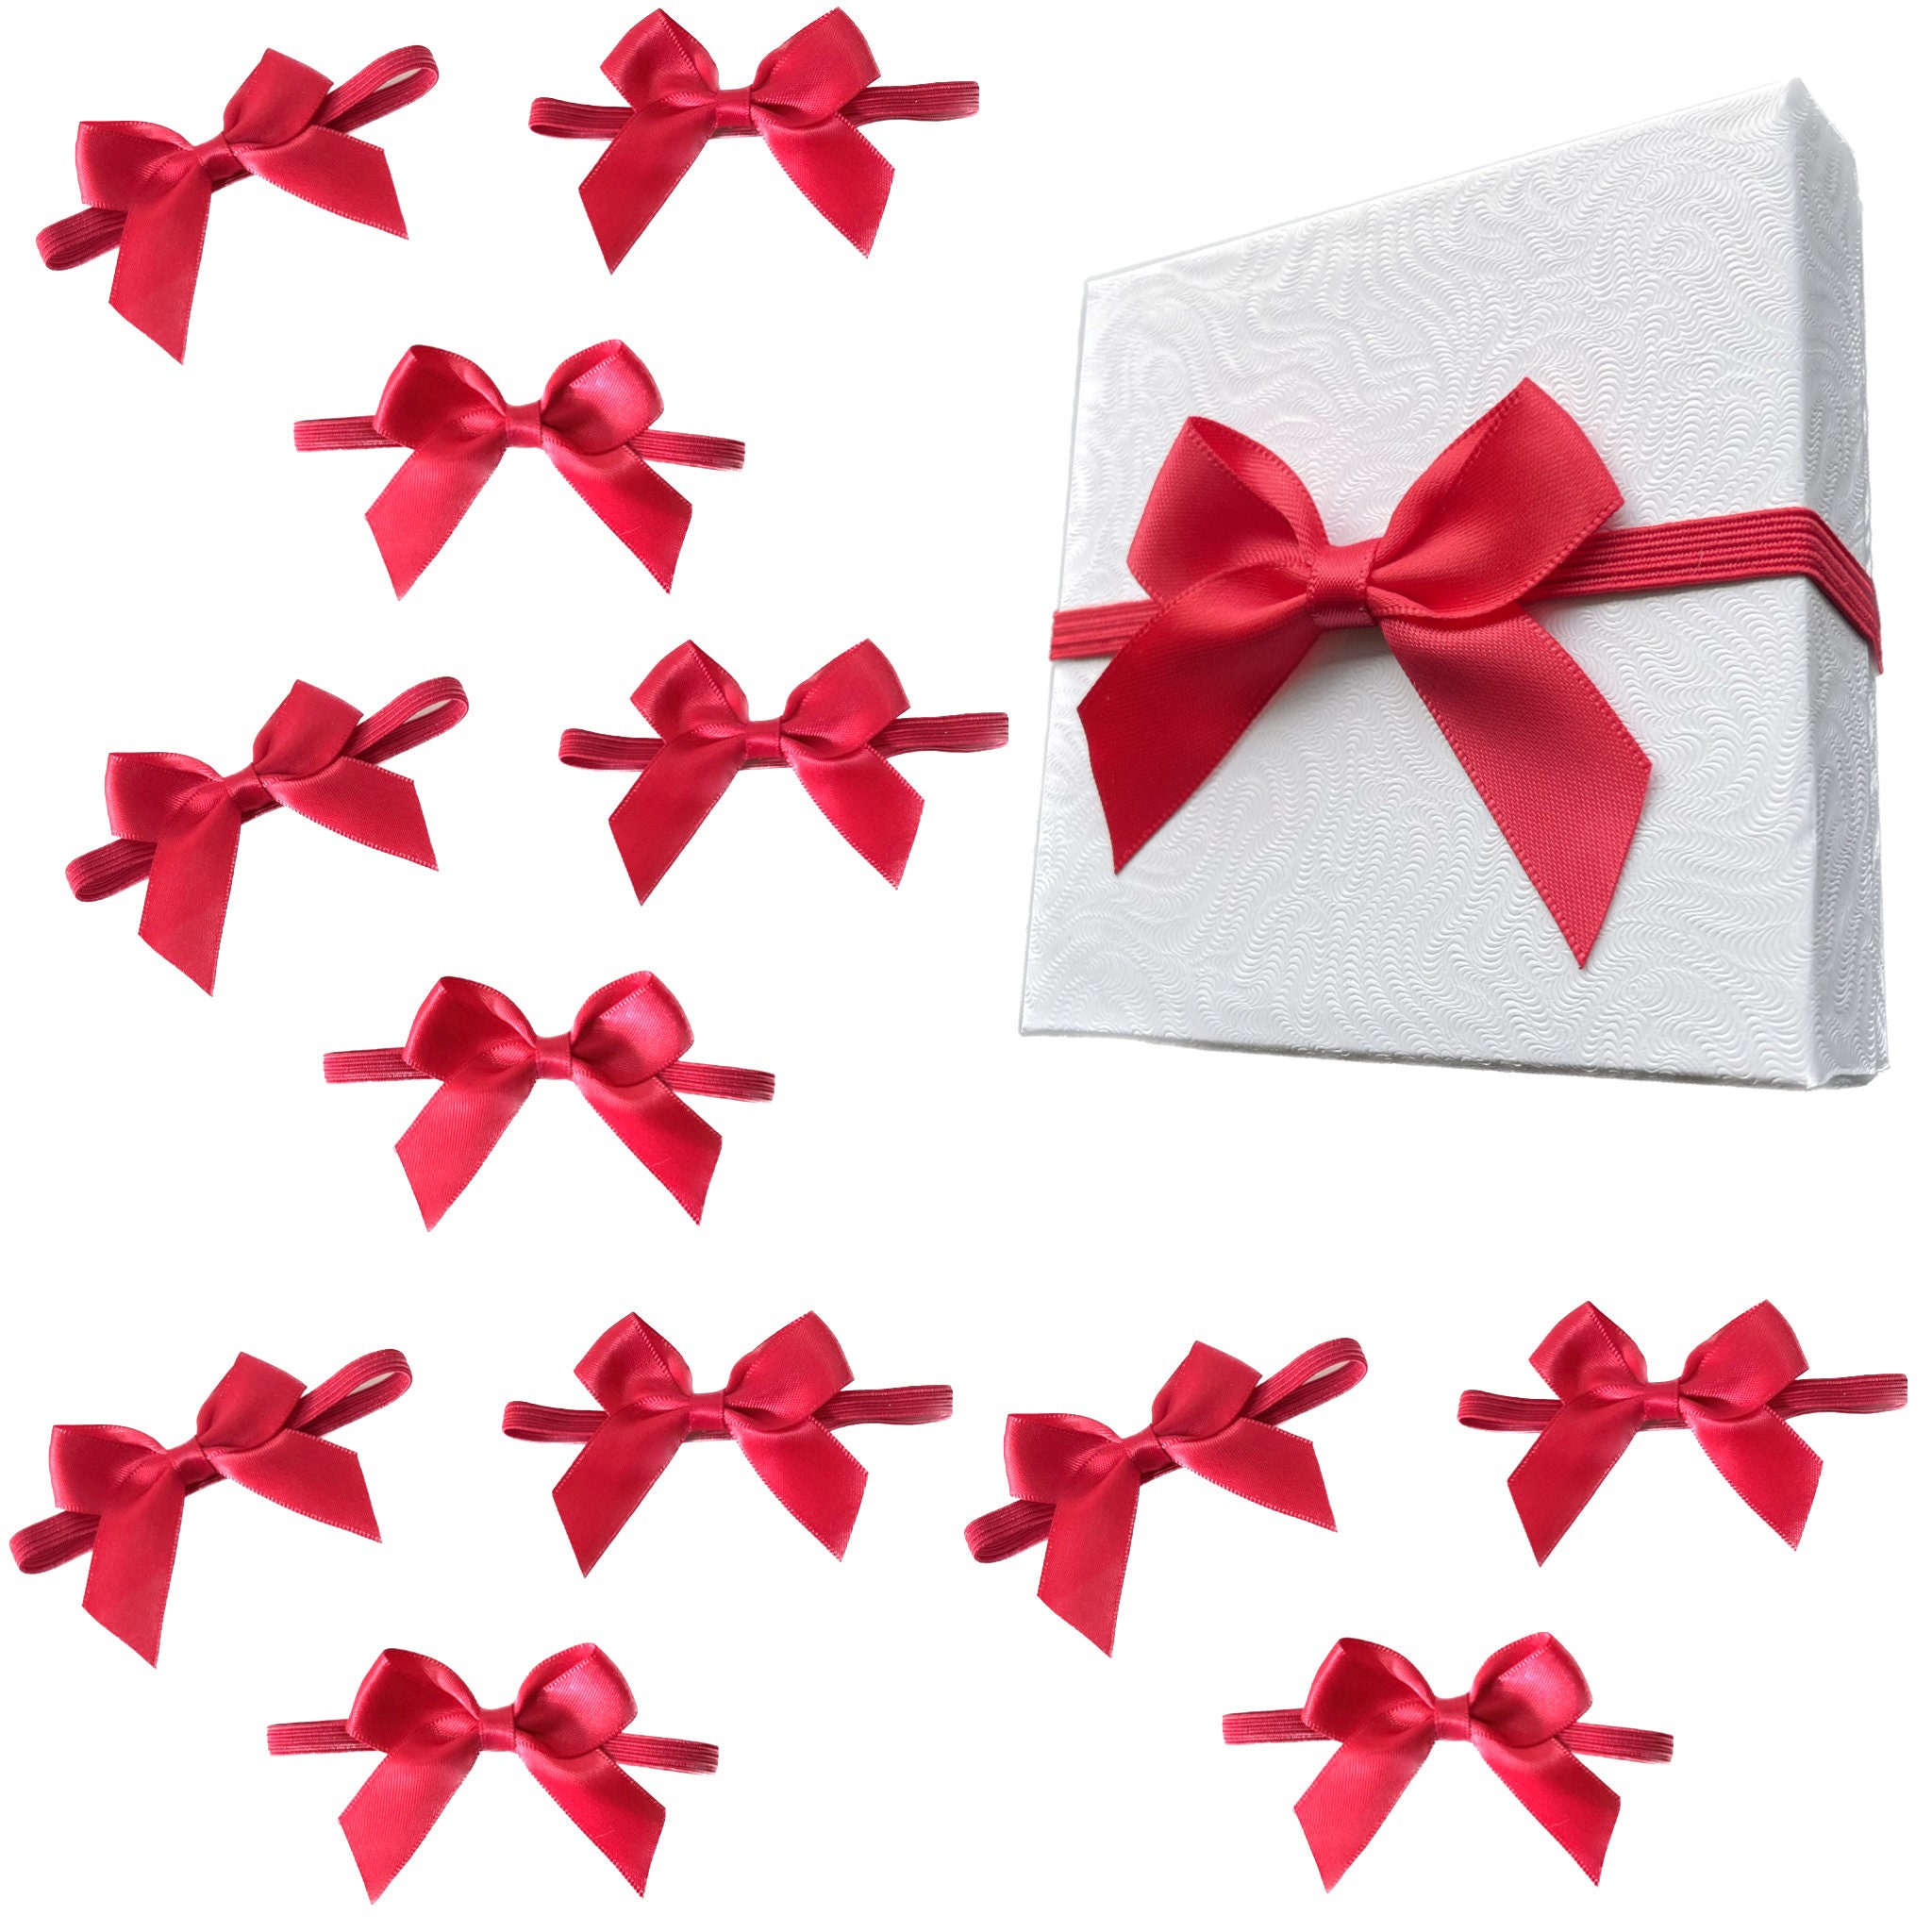 Free Shipping 600pcs/lot Red Gift Packaging Bow Gift Wrap Ribbon